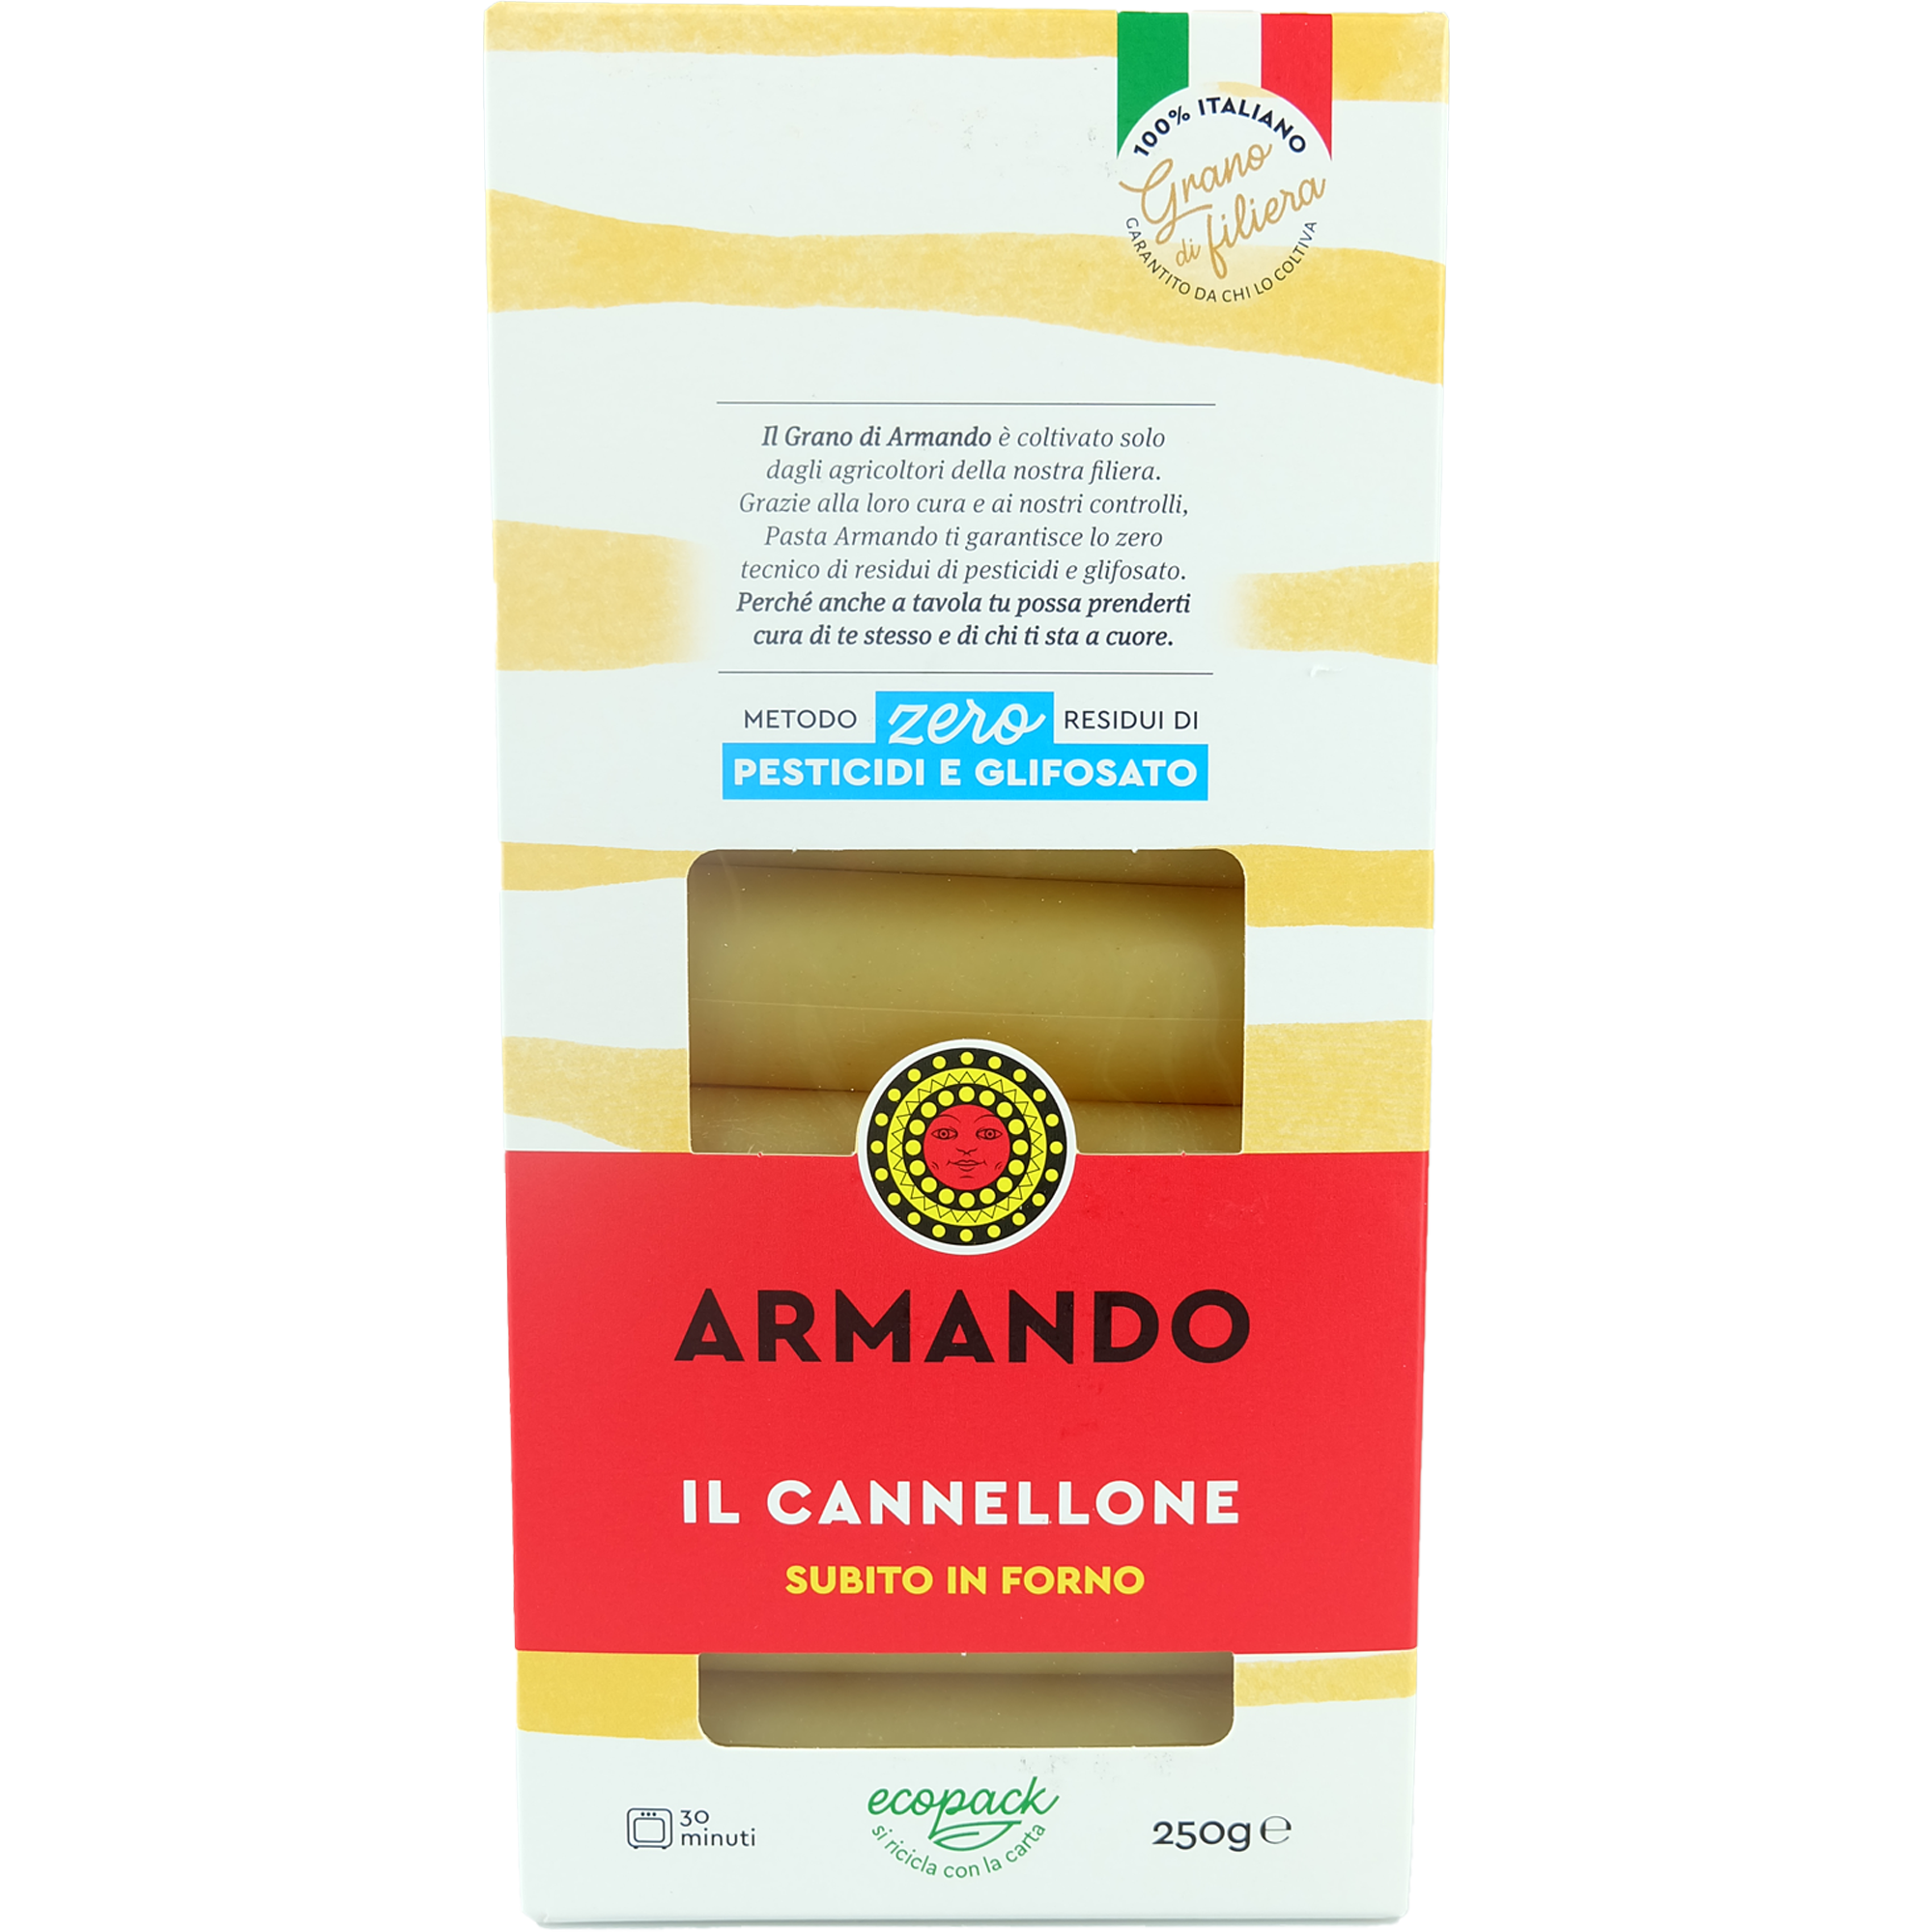 ARMANDO - CANNELLONI - BRONZE DIED AND SLOW-DRIED - Jet Italian Deli - JID-DR-IM - De Matteis - Italian food - Italian grocery - Food delivery - Thailand - Wine - Truffle - Pasta - Cheese